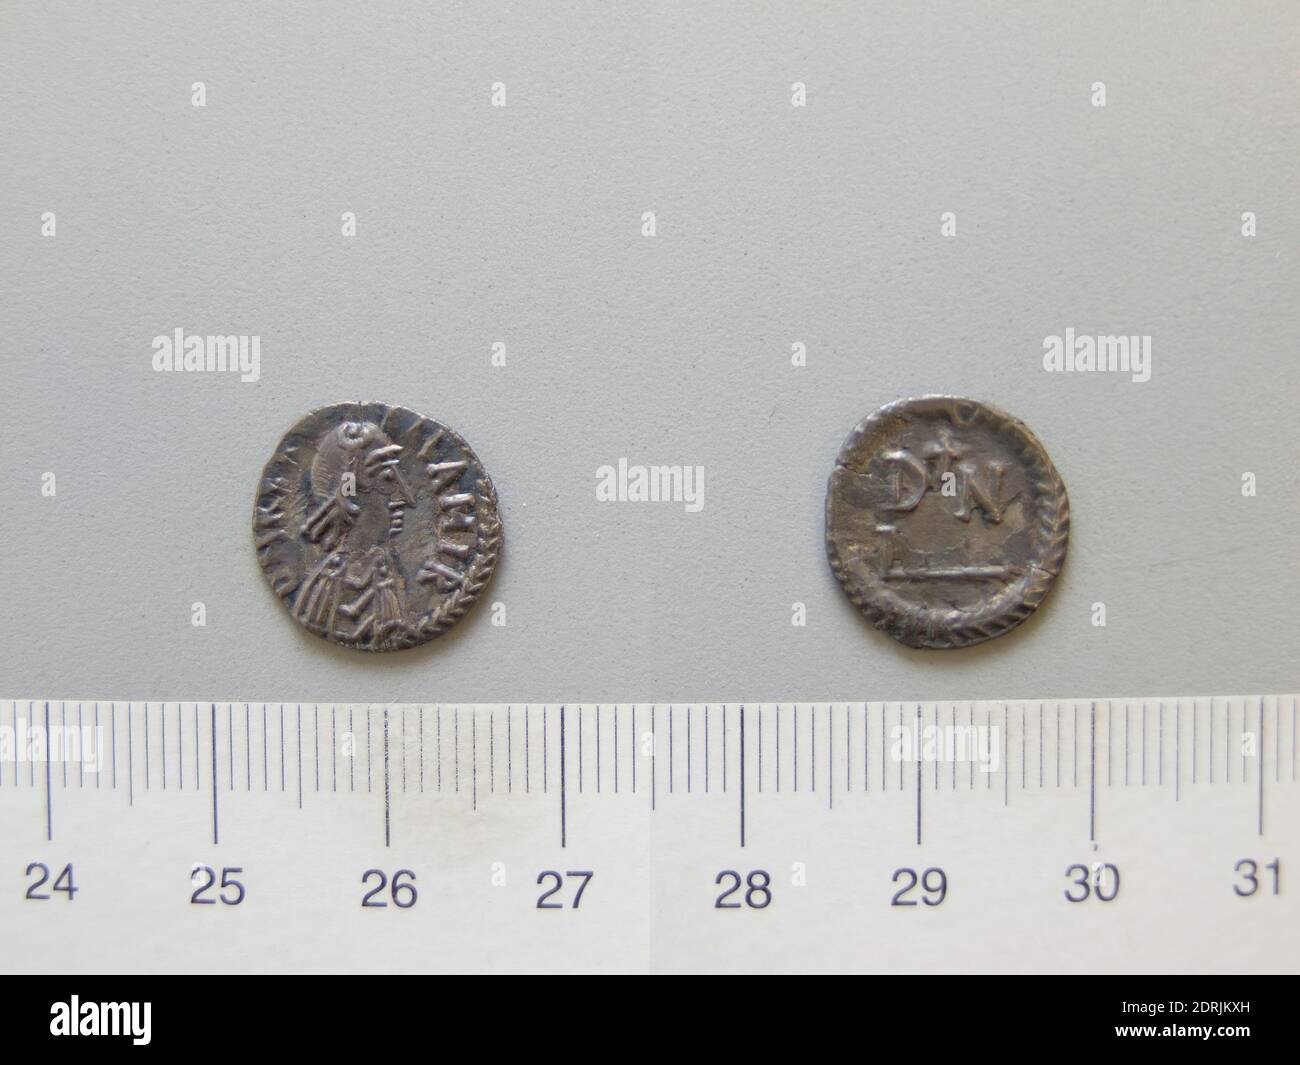 Ruler: Gelimer, King of the Vandals and Alans, 480–553, ruled 530–34, Mint: Carthage, 50 Denarii of Gelimer from Carthage, 530–33, Silver, 1.12 g, 2:00, 14 mm, Made in Carthage, Zeugitana, Vandalic, 6th century A.D., Numismatics Stock Photo